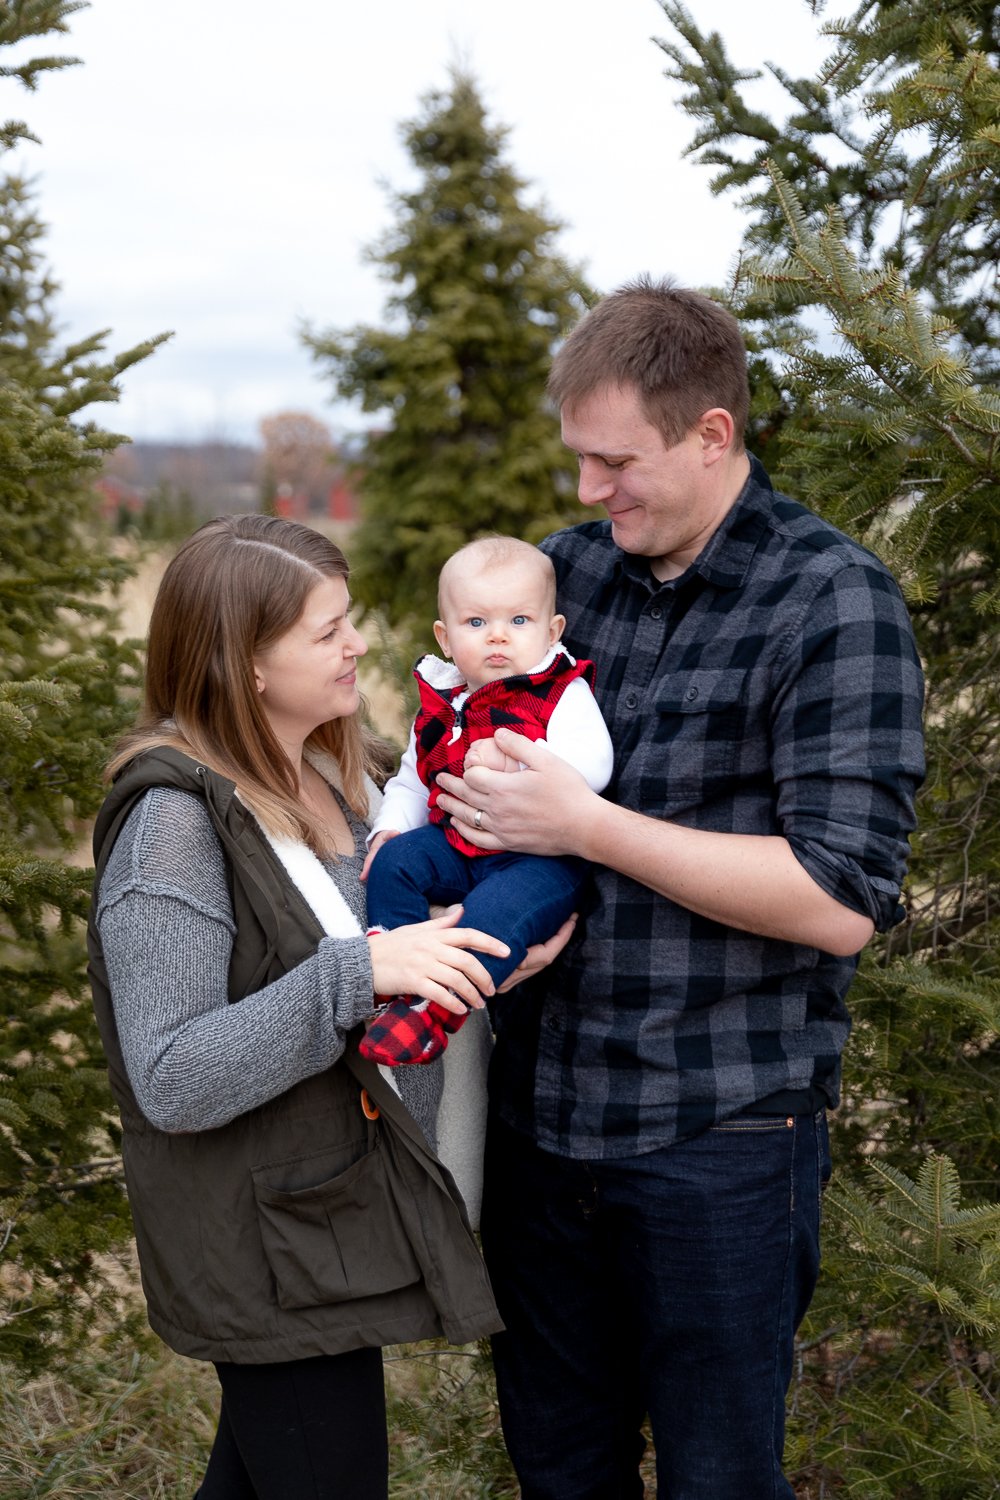 mom and dad holding their daughter in front of an evergreen tree at Poplar creek tree farm